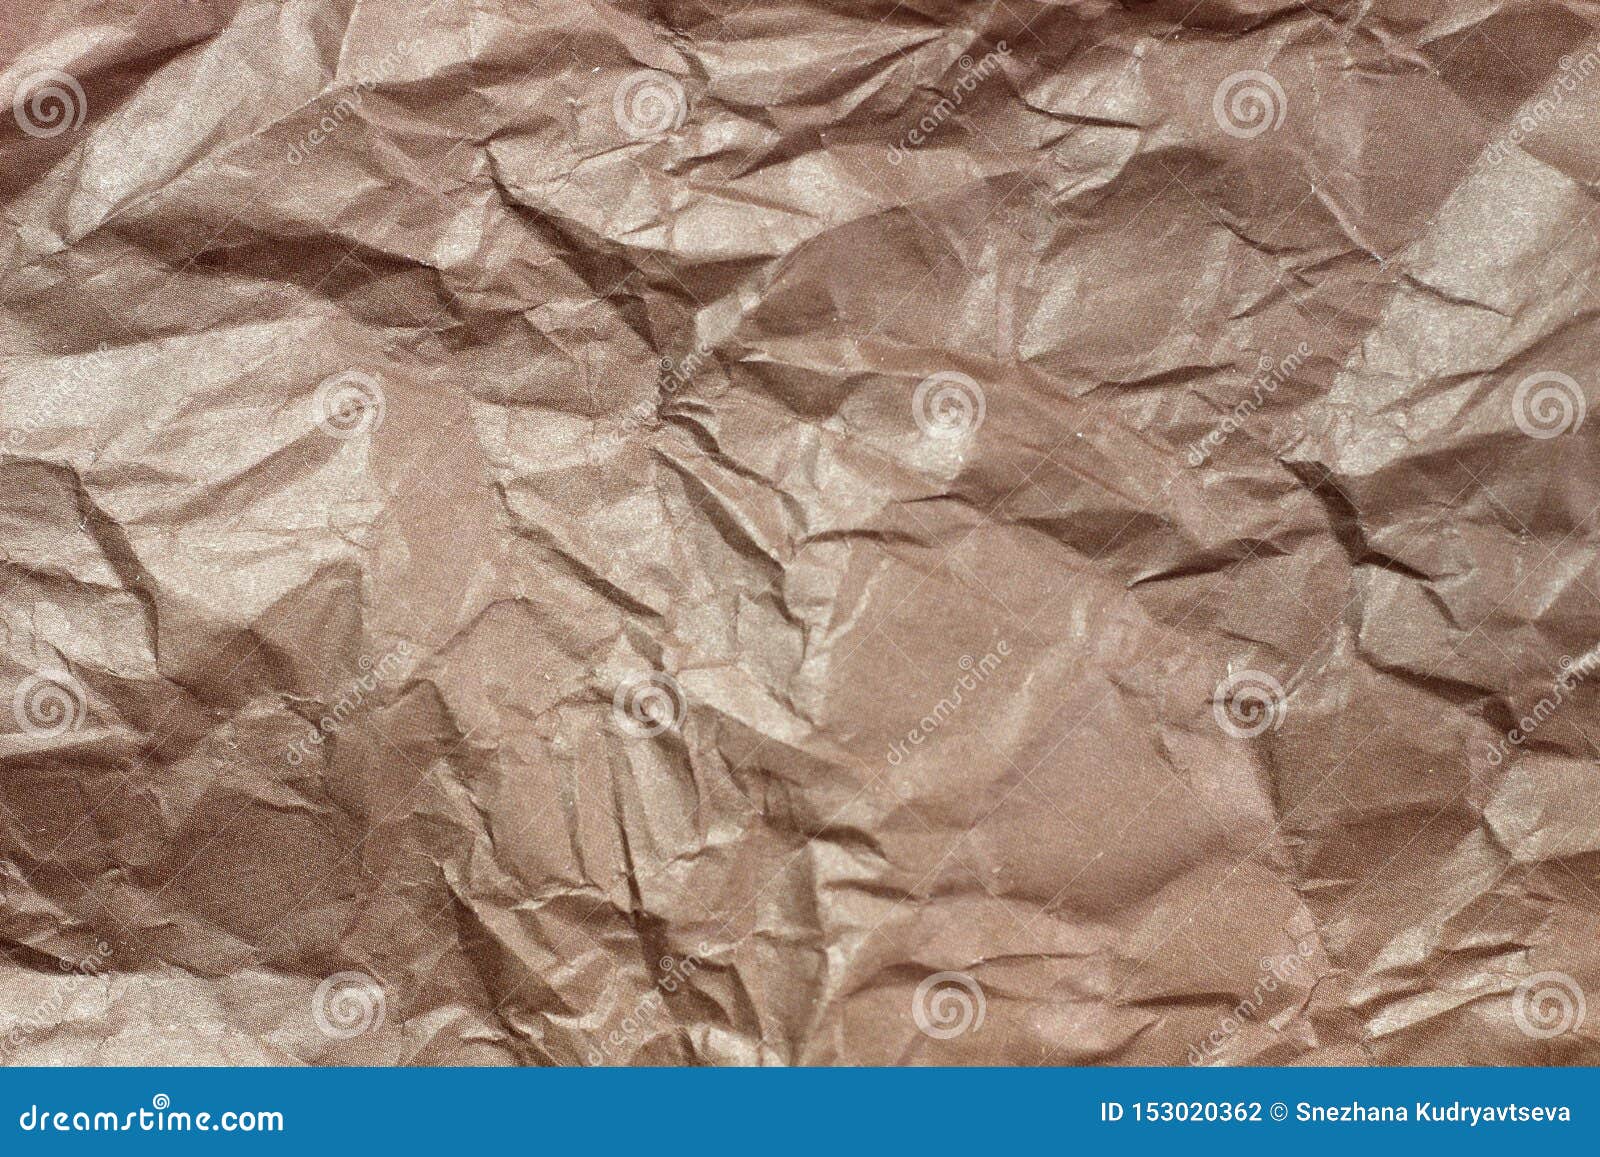 990 Paper Crush Background Photos Free Royalty Free Stock Photos From Dreamstime